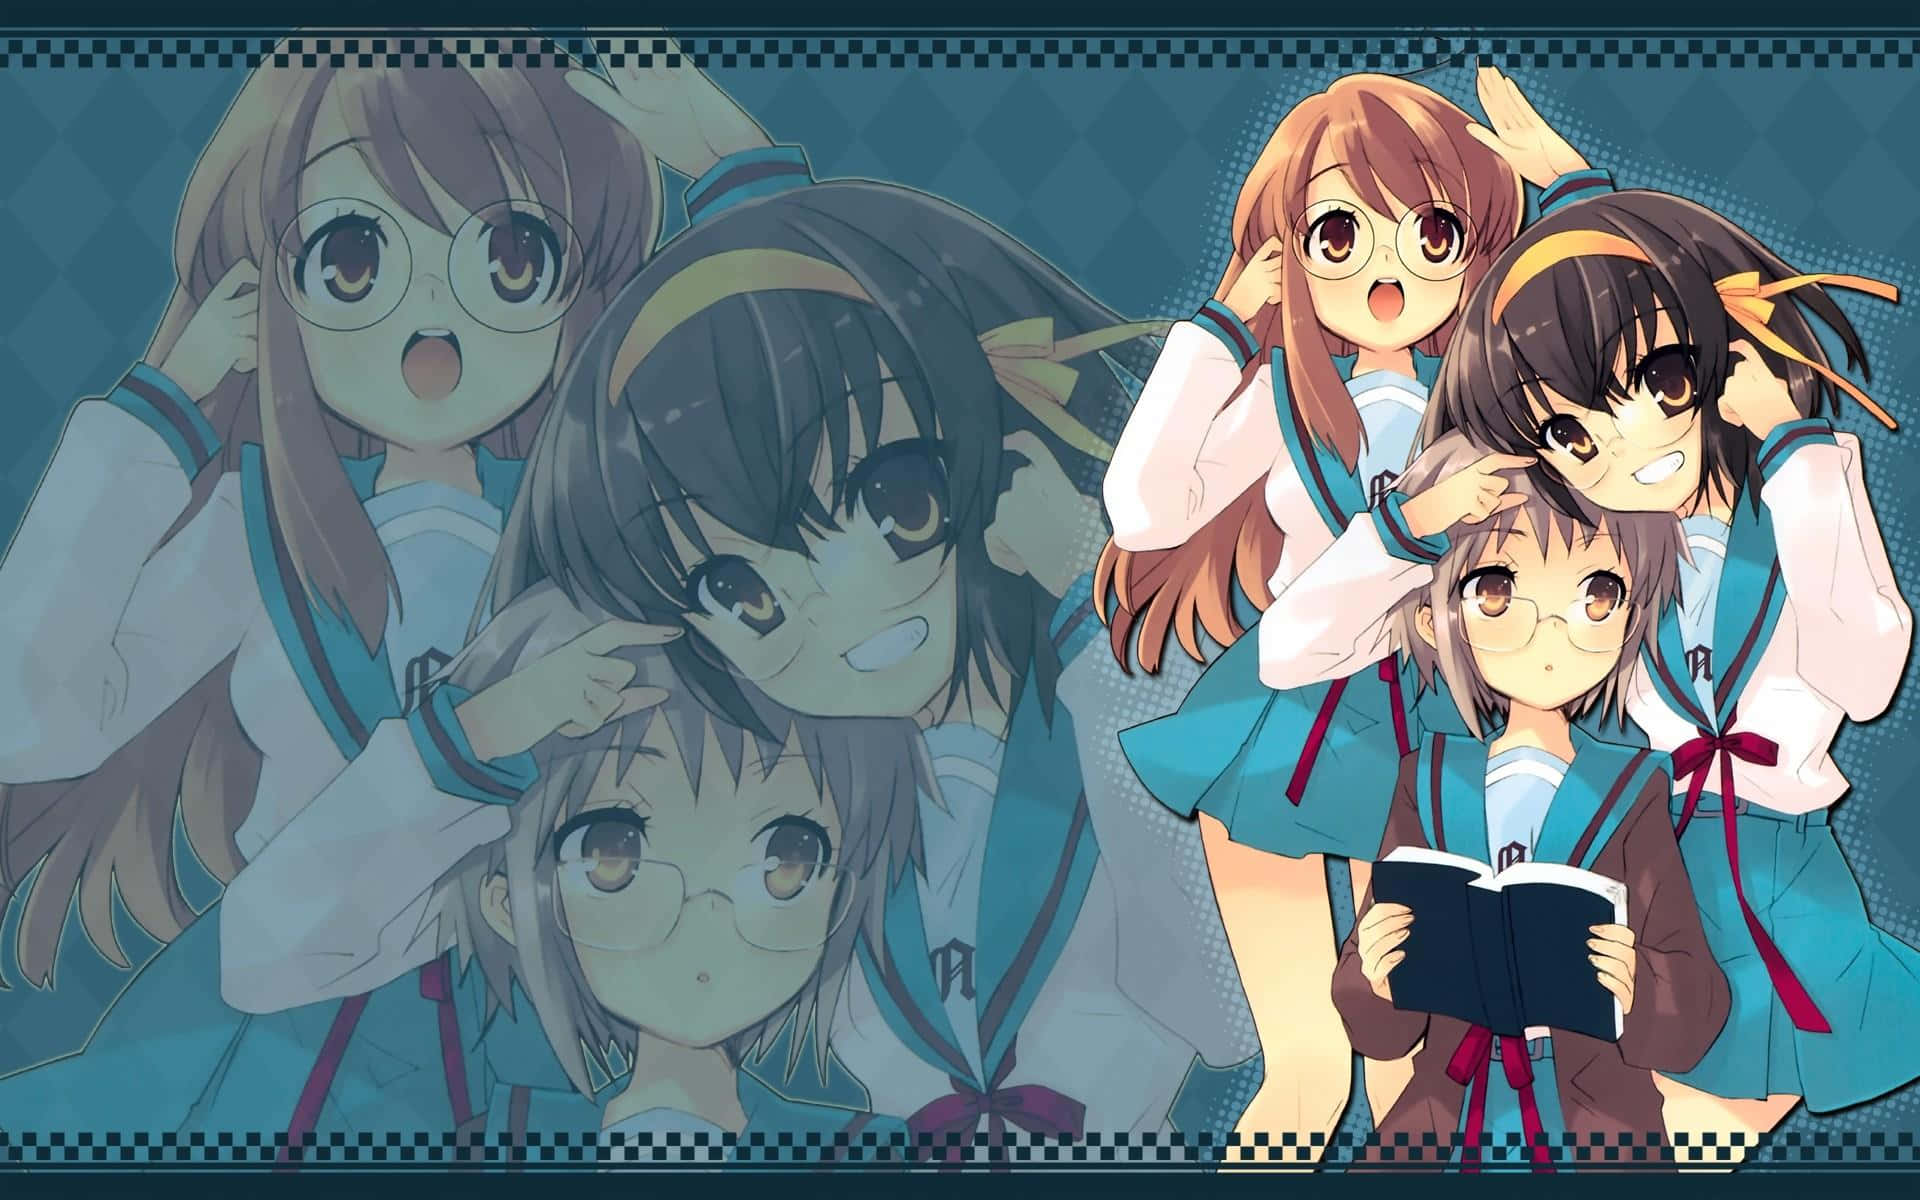 The lively and energetic Haruhi Suzumiya in her iconic school uniform Wallpaper